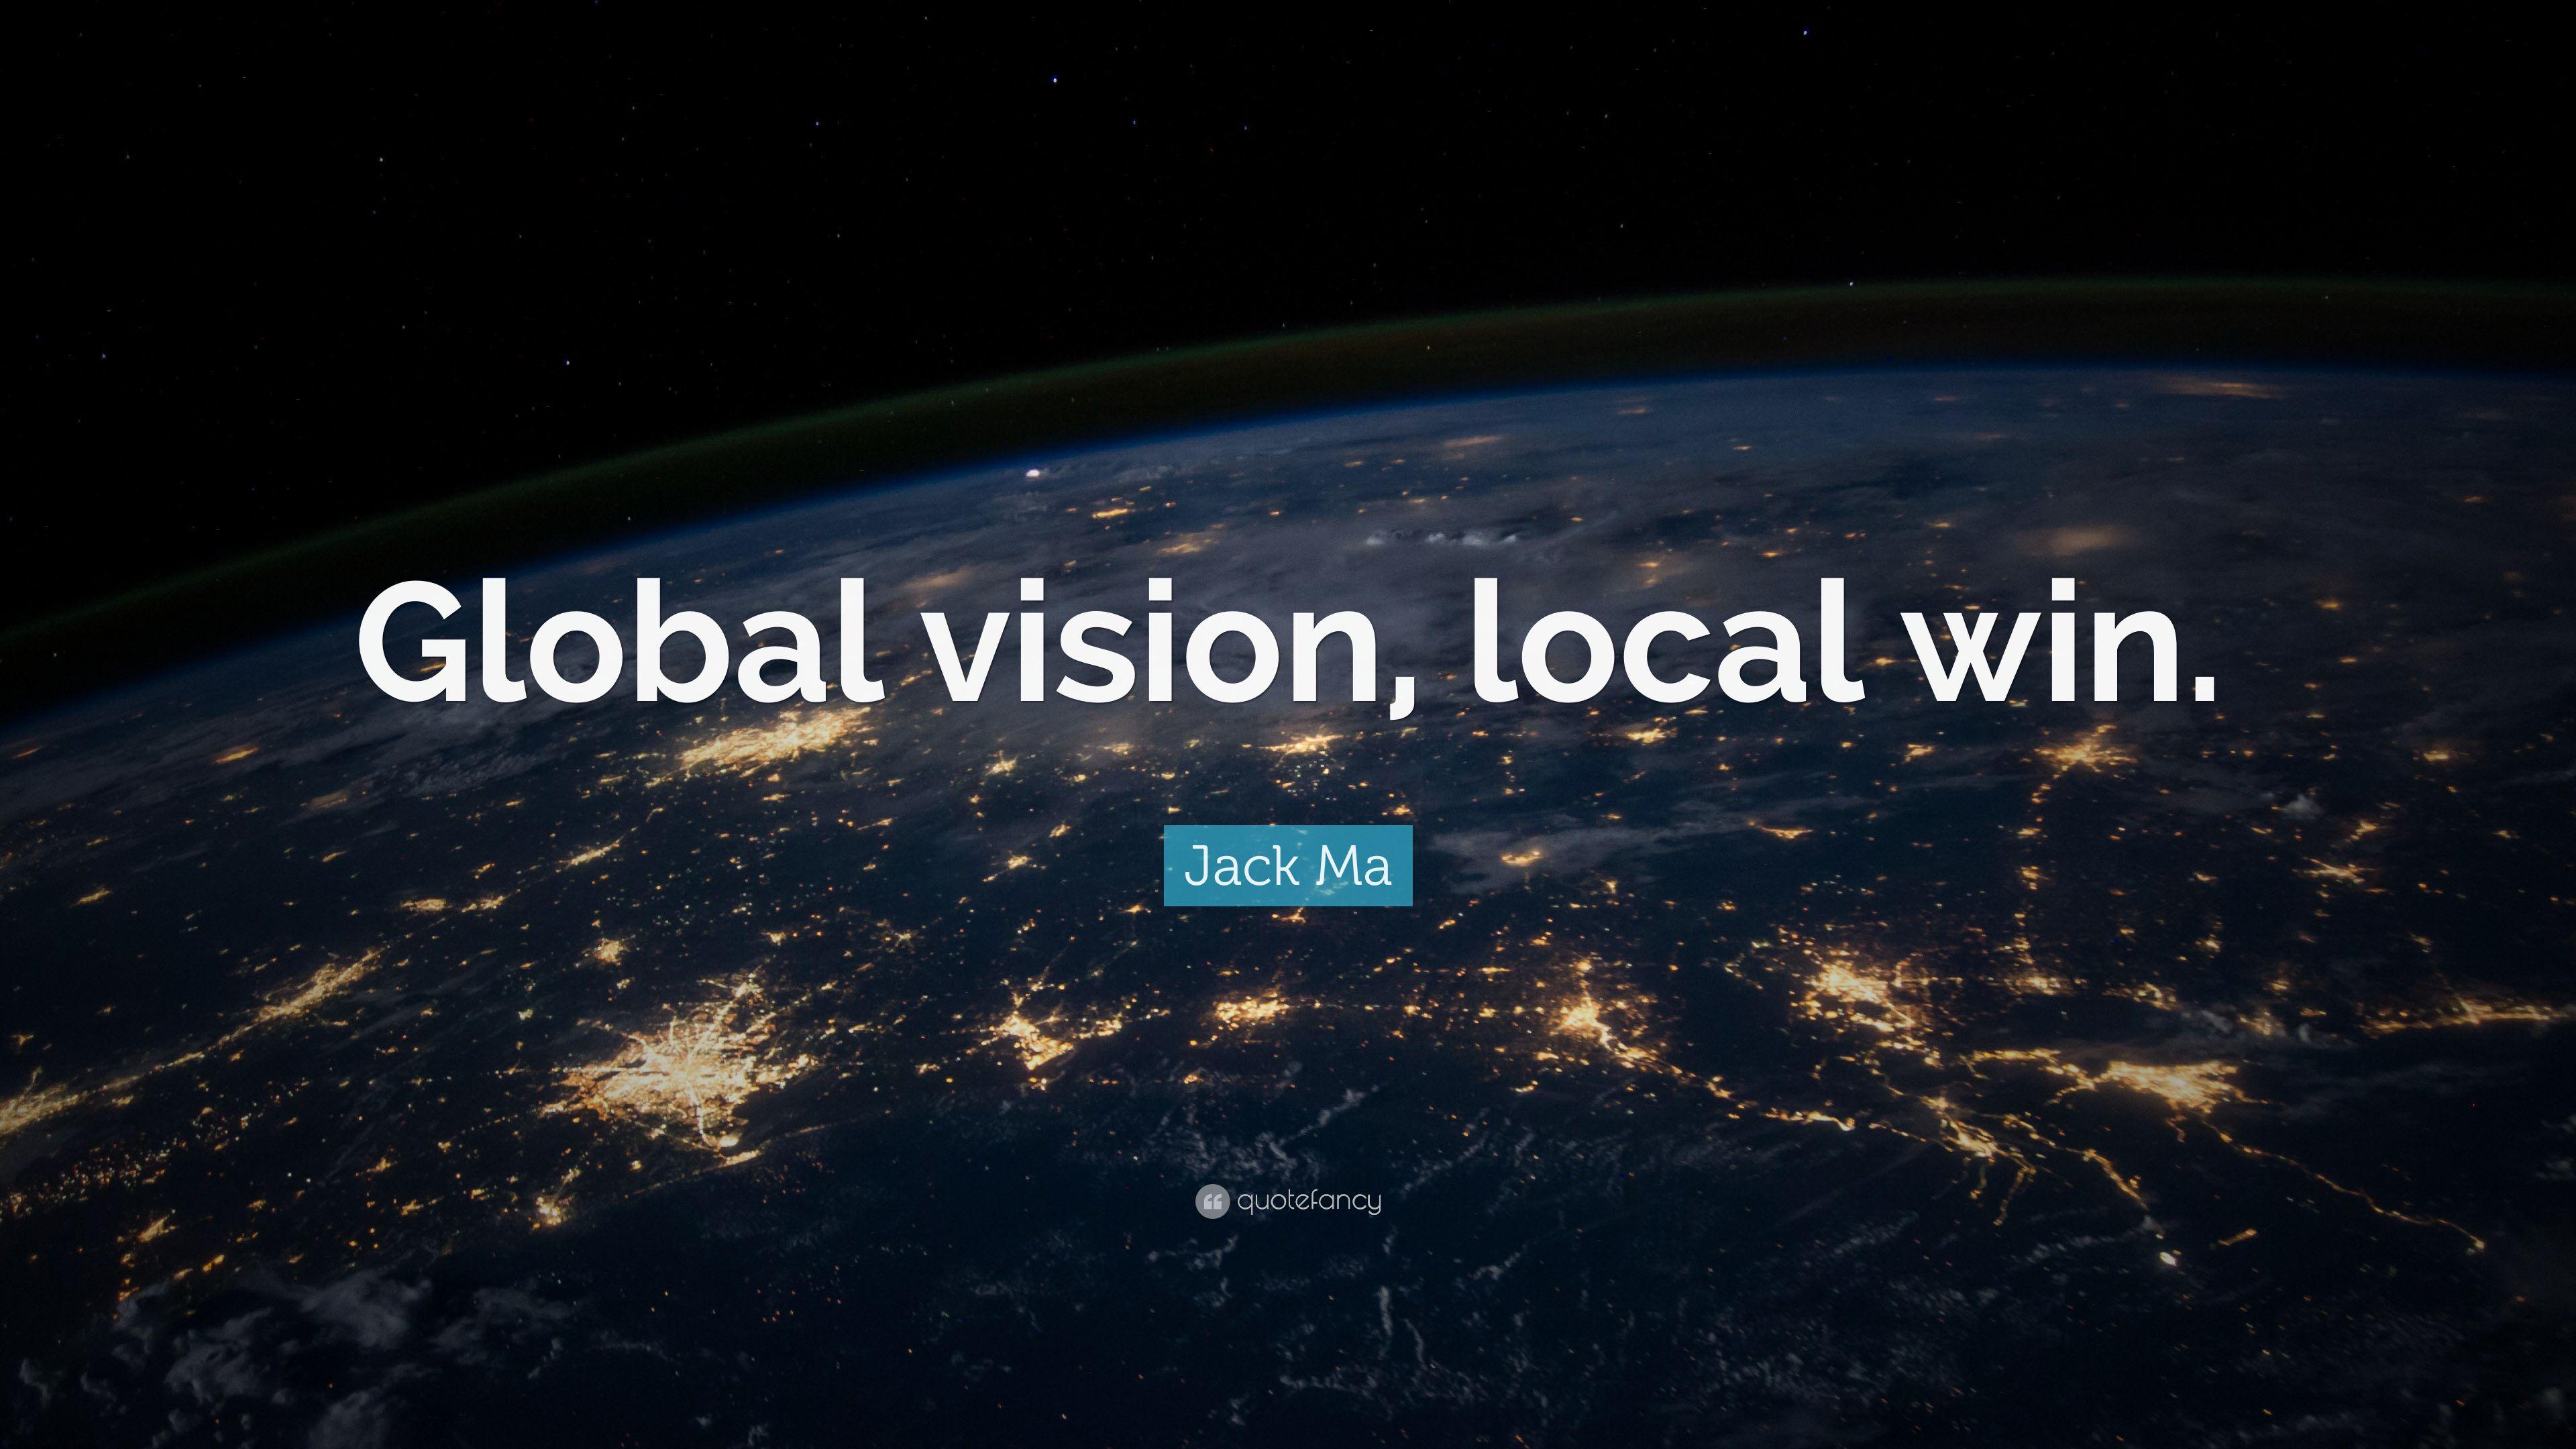 Jack Ma Quote: “Global vision, local win.” 13 wallpaper